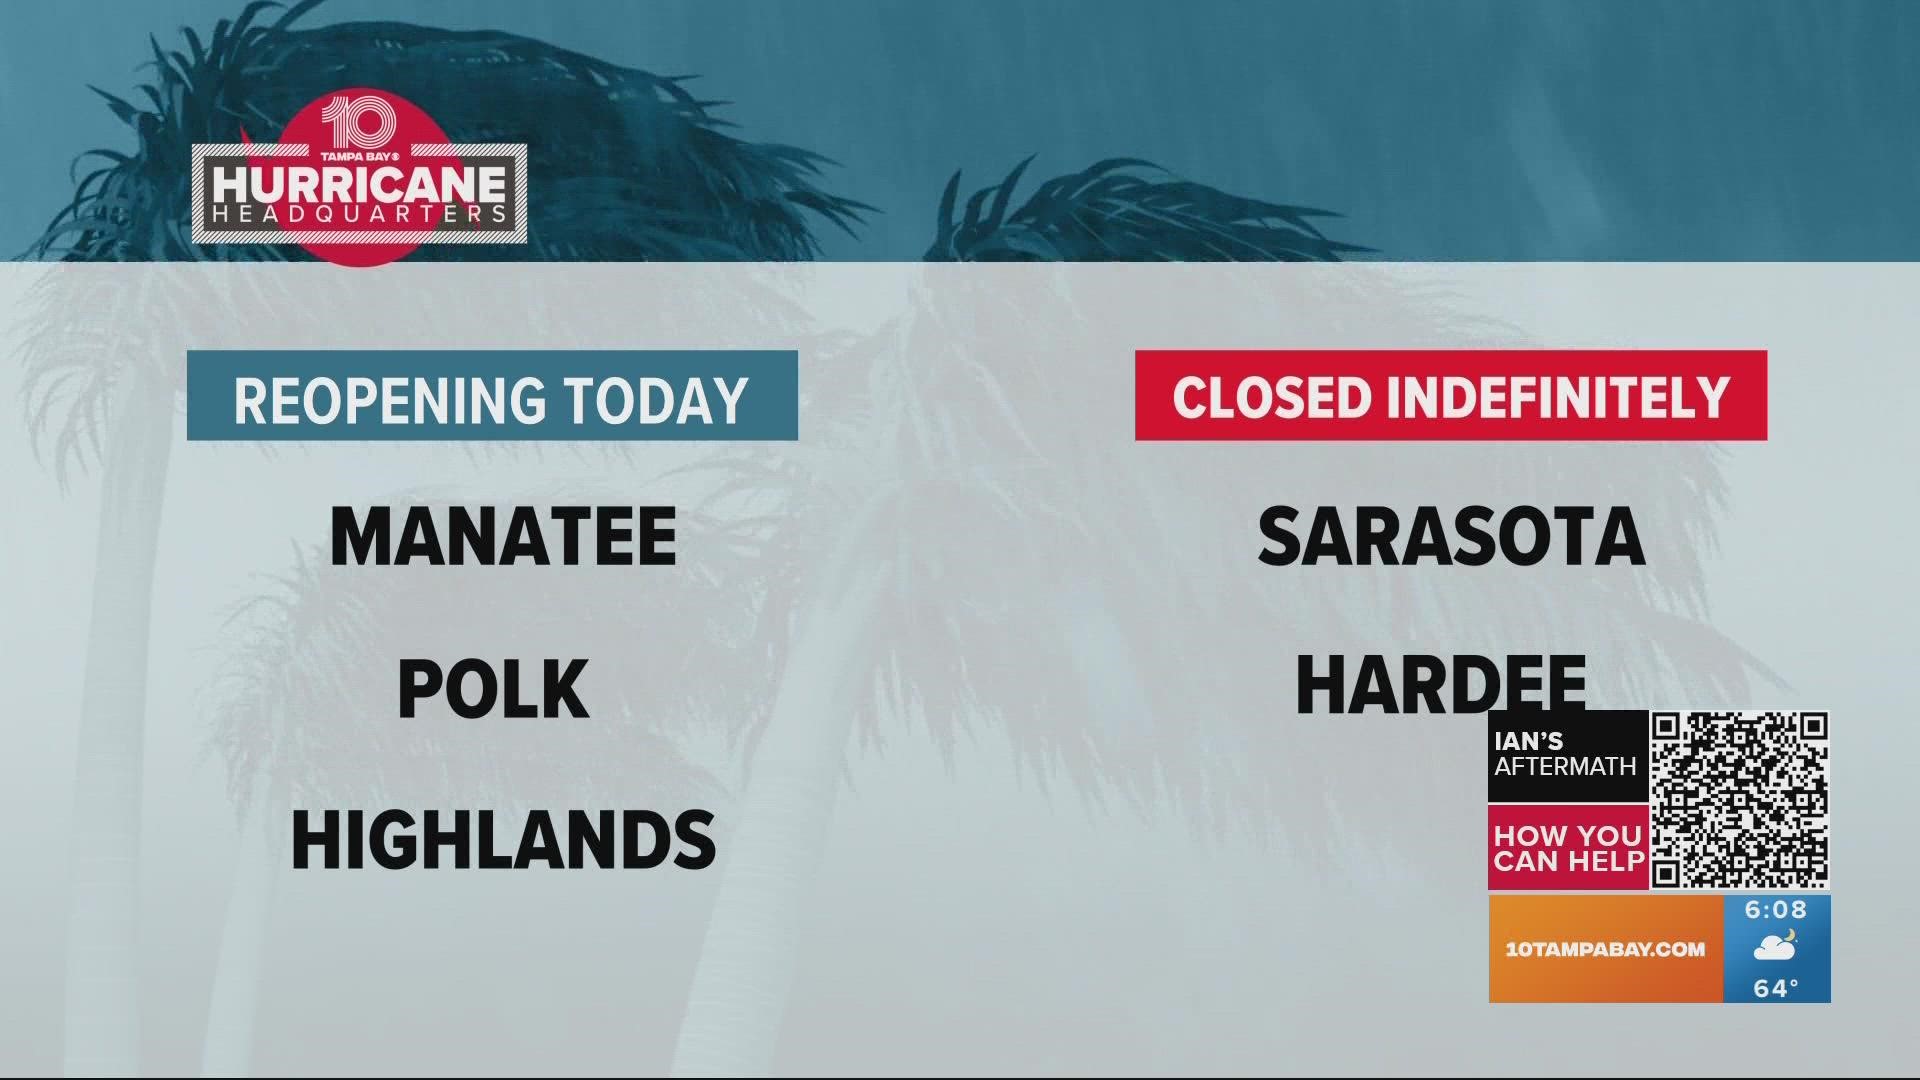 Sarasota and Hardee County schools are close until further notice.